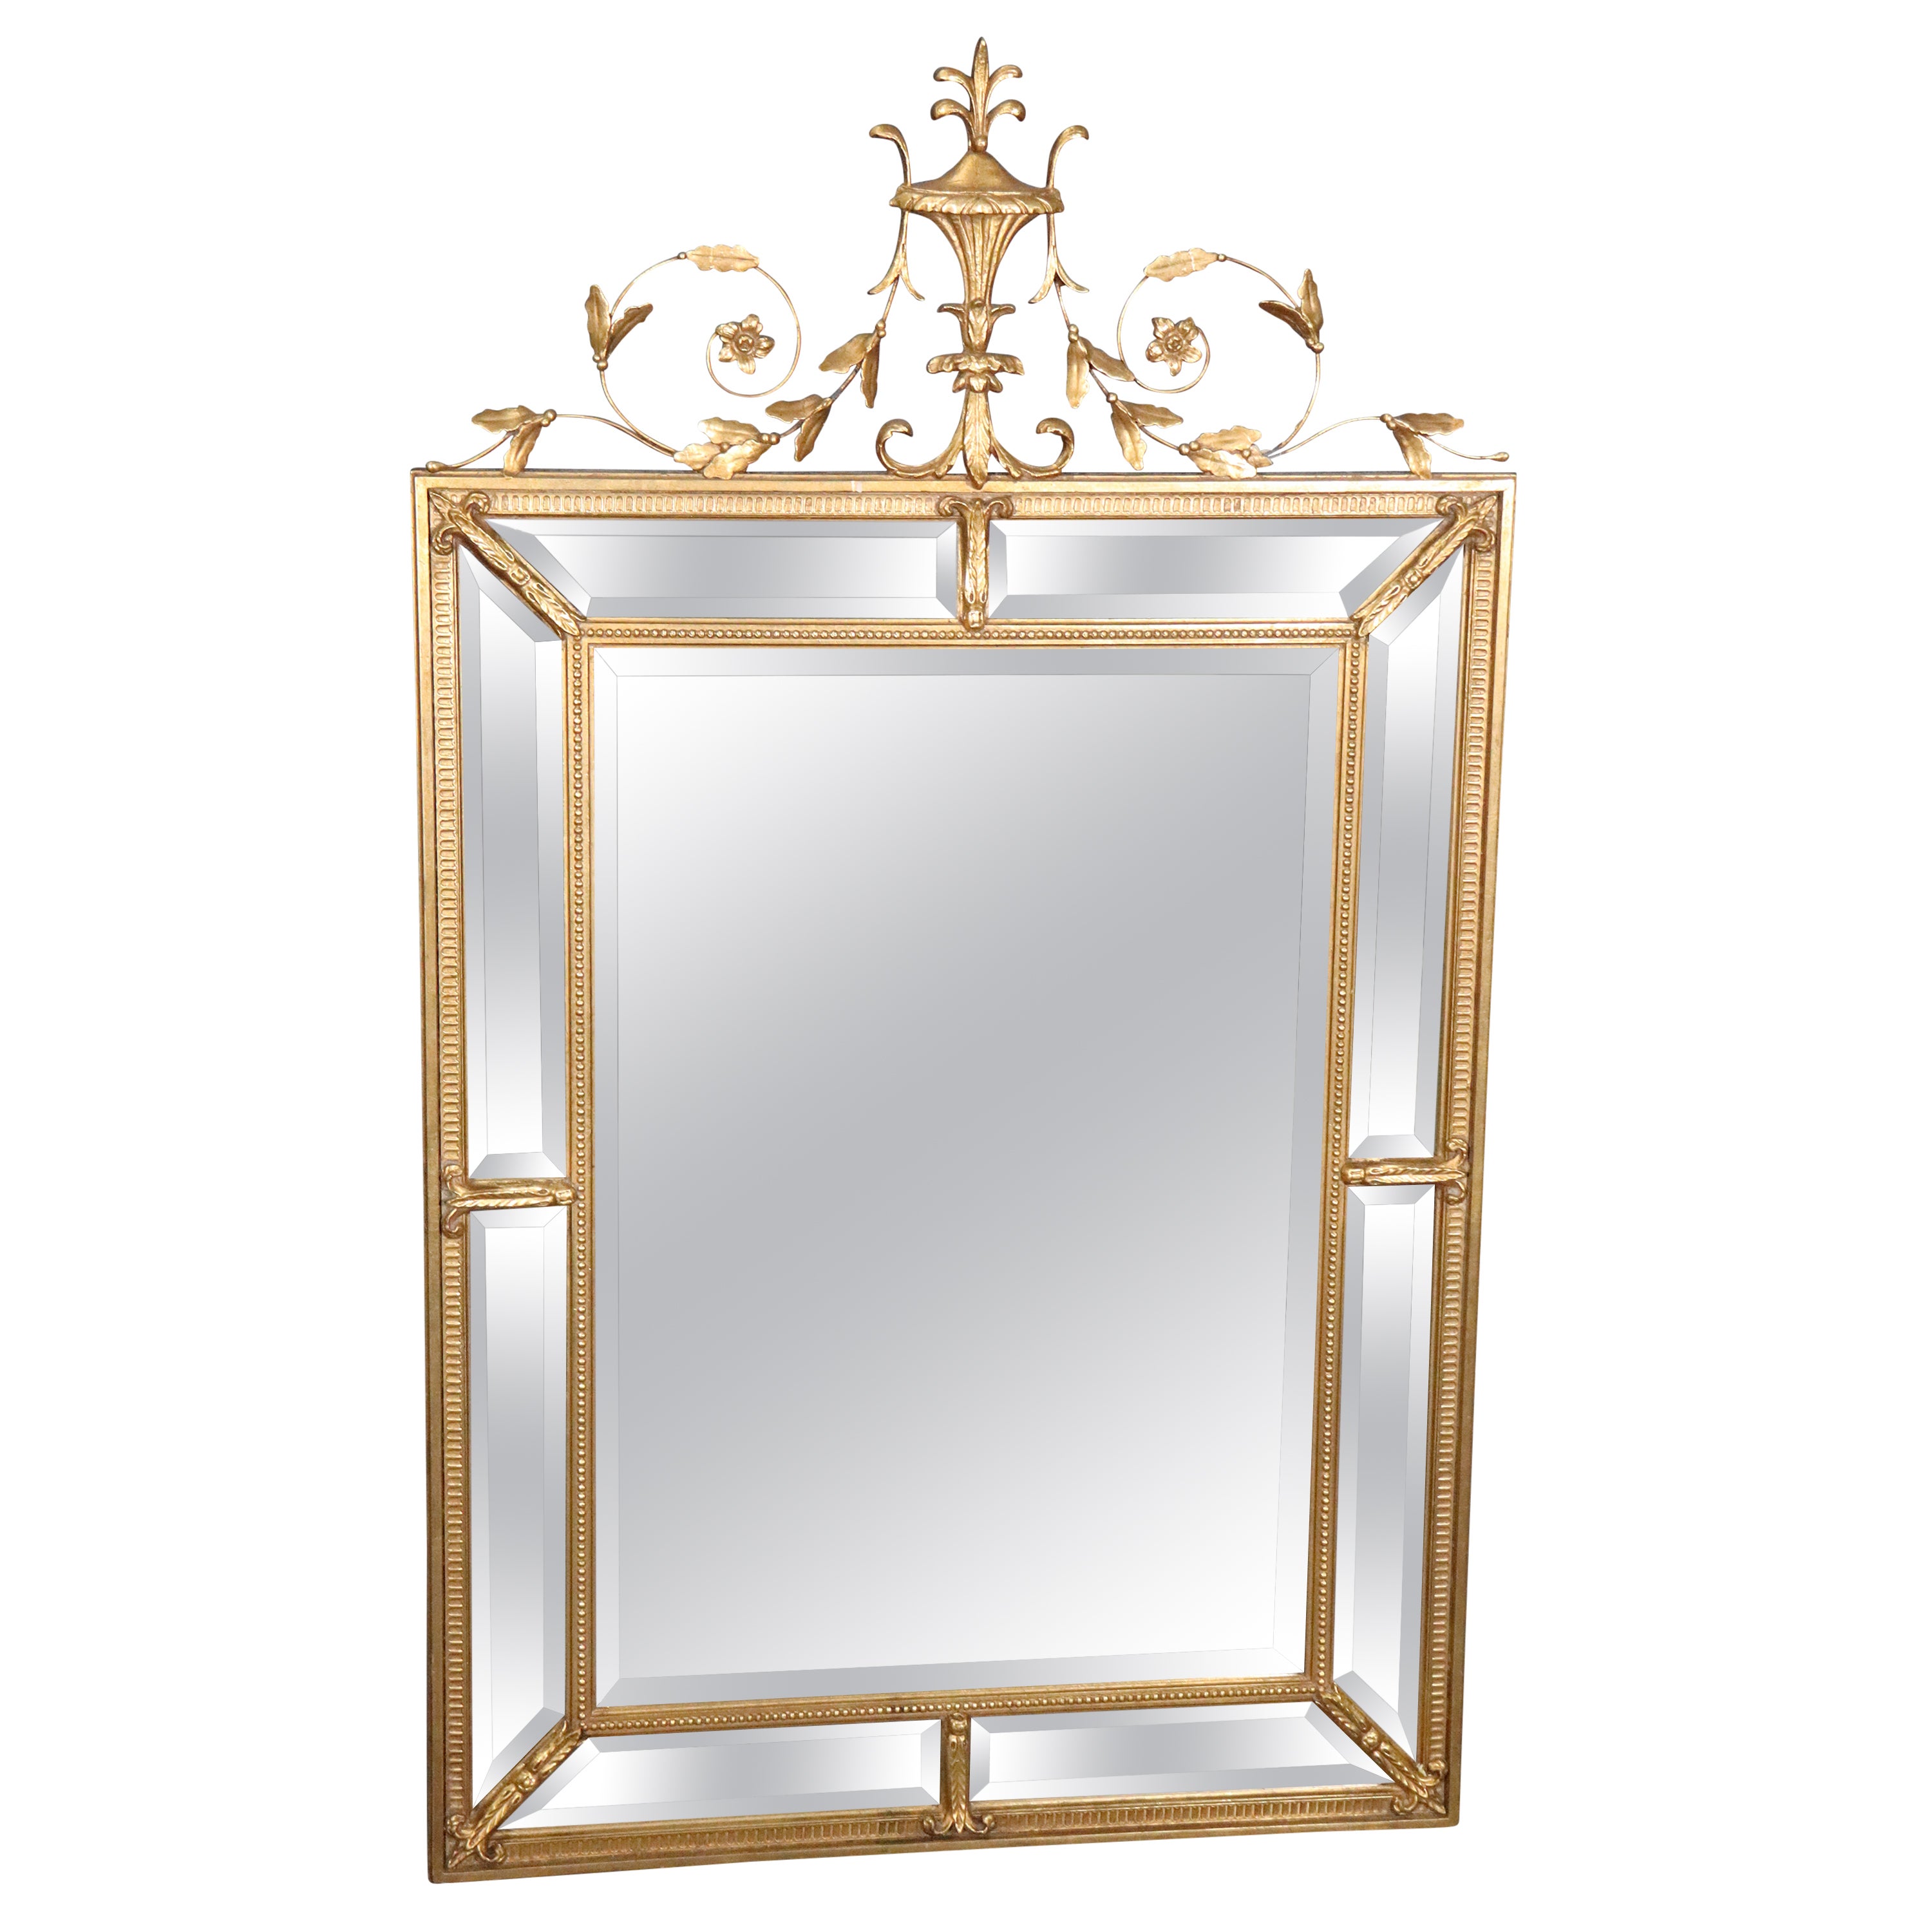 French Louis XVI Style Gilt Carved Beveled Glass Wall Hanging Mirror by Friedman